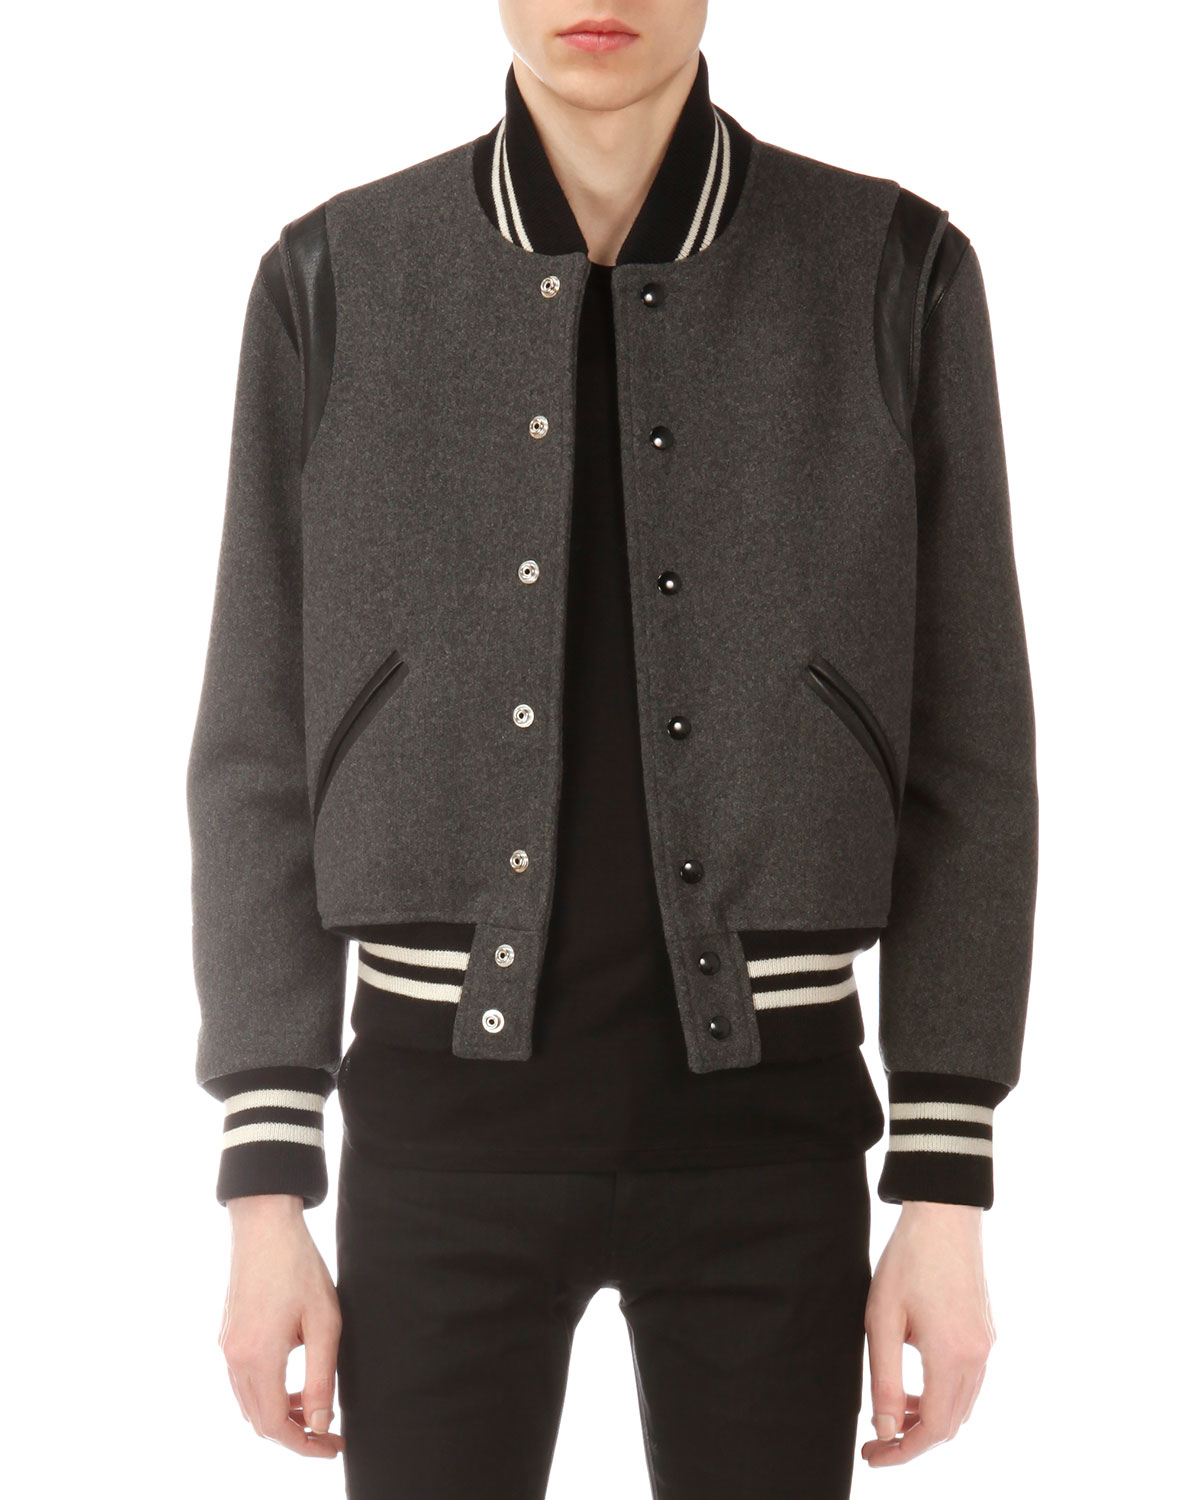 Everyone Wore the Same Saint Laurent Teddy Jacket This Year